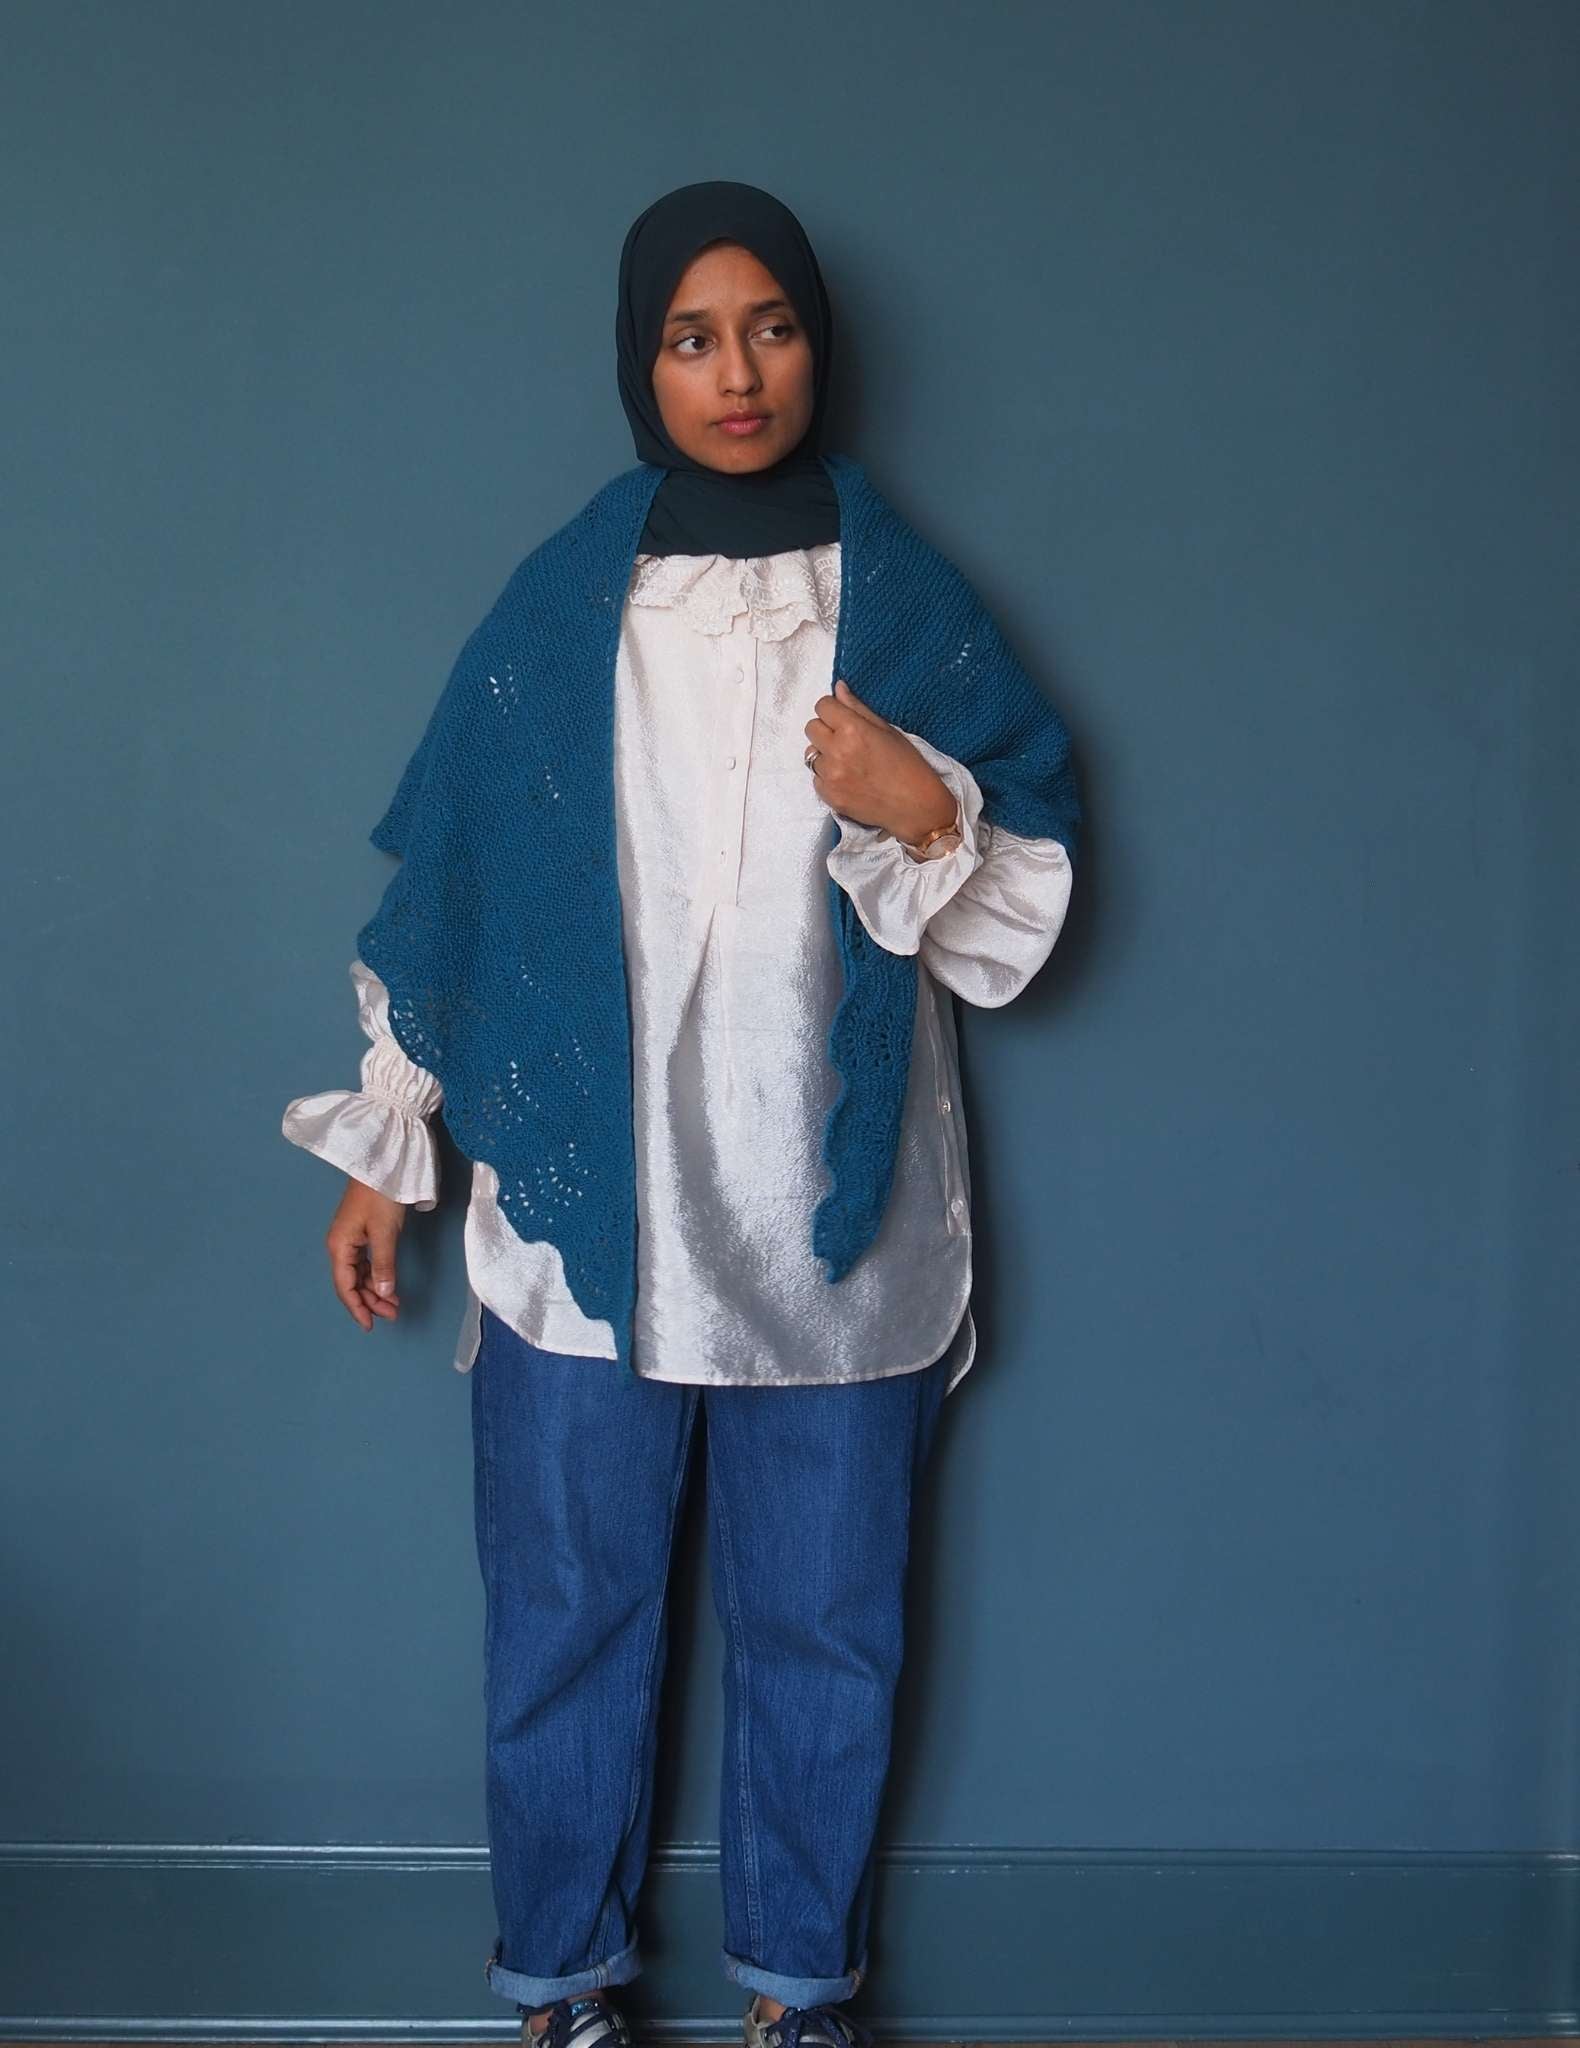 A brown woman in a hijab wears a ruffled white shirt and jeans, and stands in front of a dark blue background. She is wearing a blue wool shawl around her neck with the pointed ends hanging down in the front.